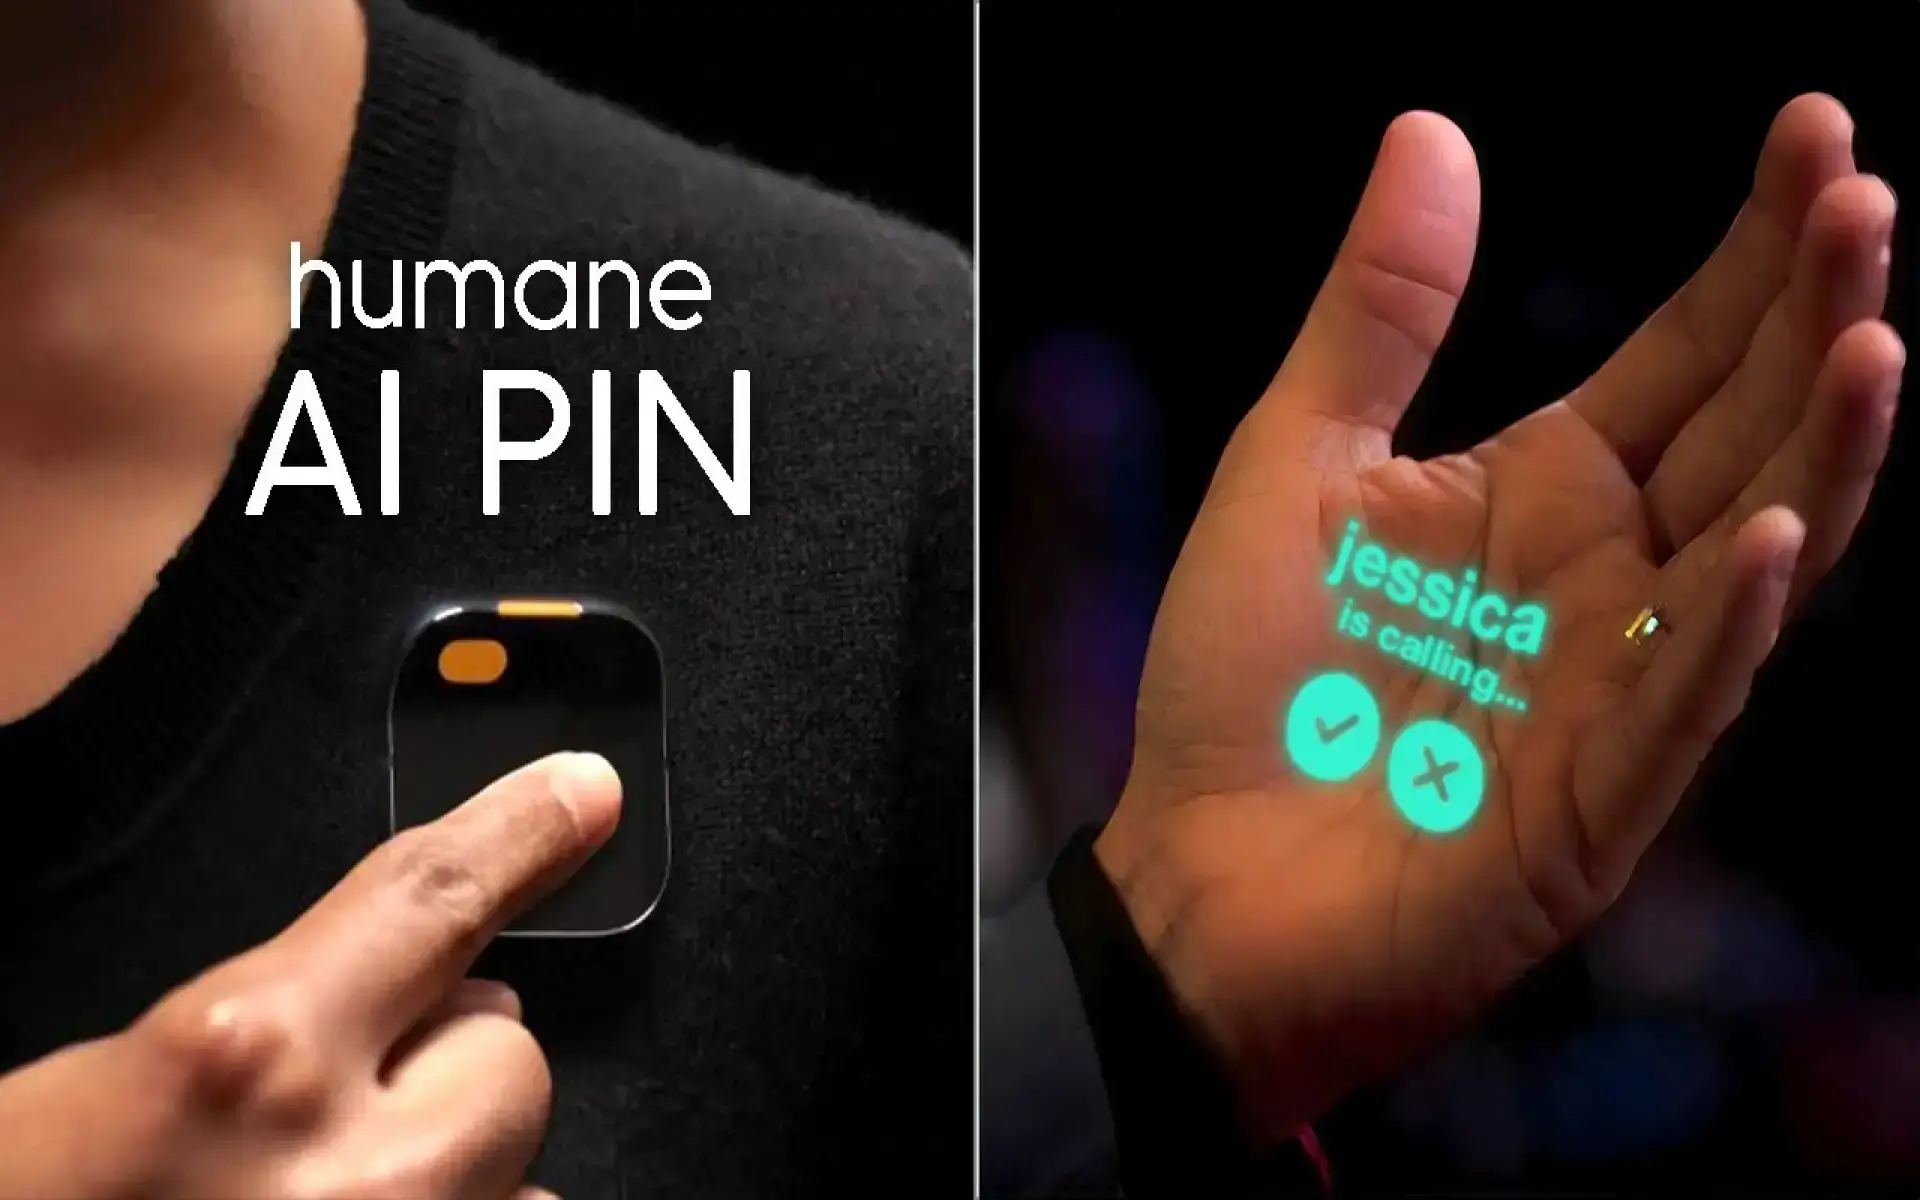 Humane’s Ai Pin offers an intriguing concept and shows great potential